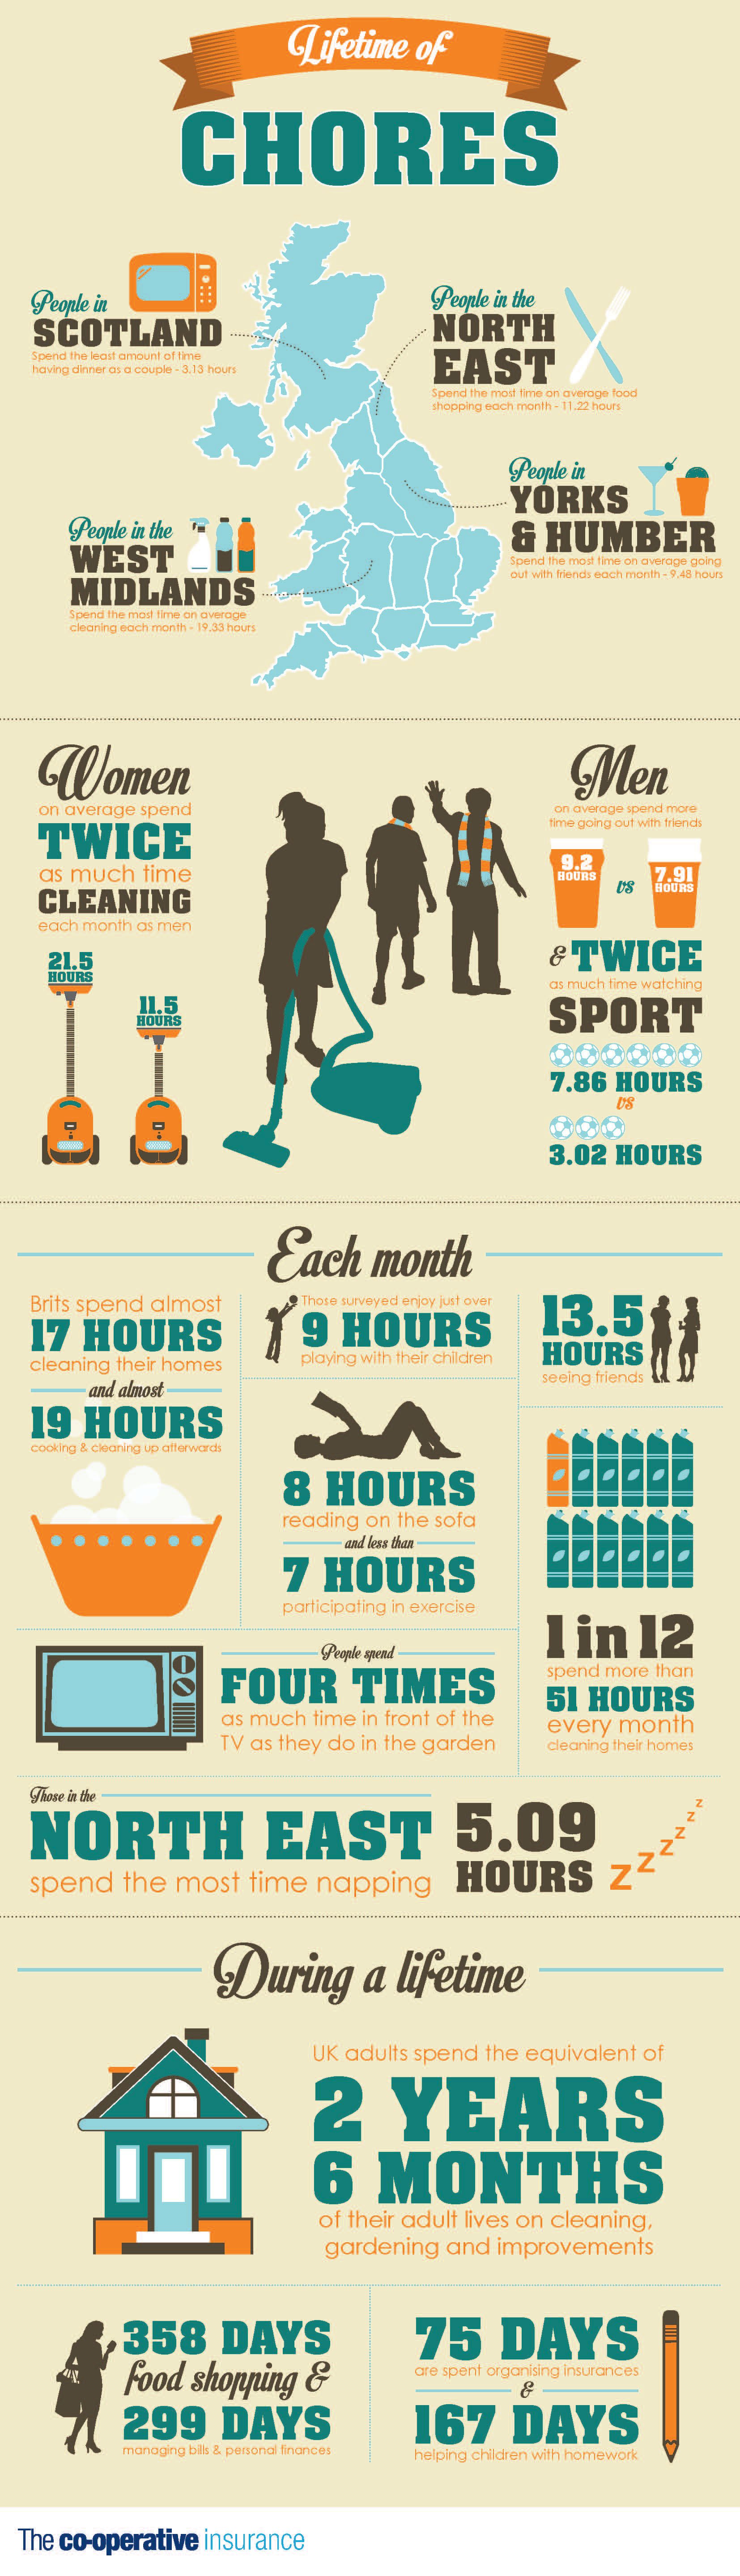 How Many Hours Do You Spend on Chores? - Infographic